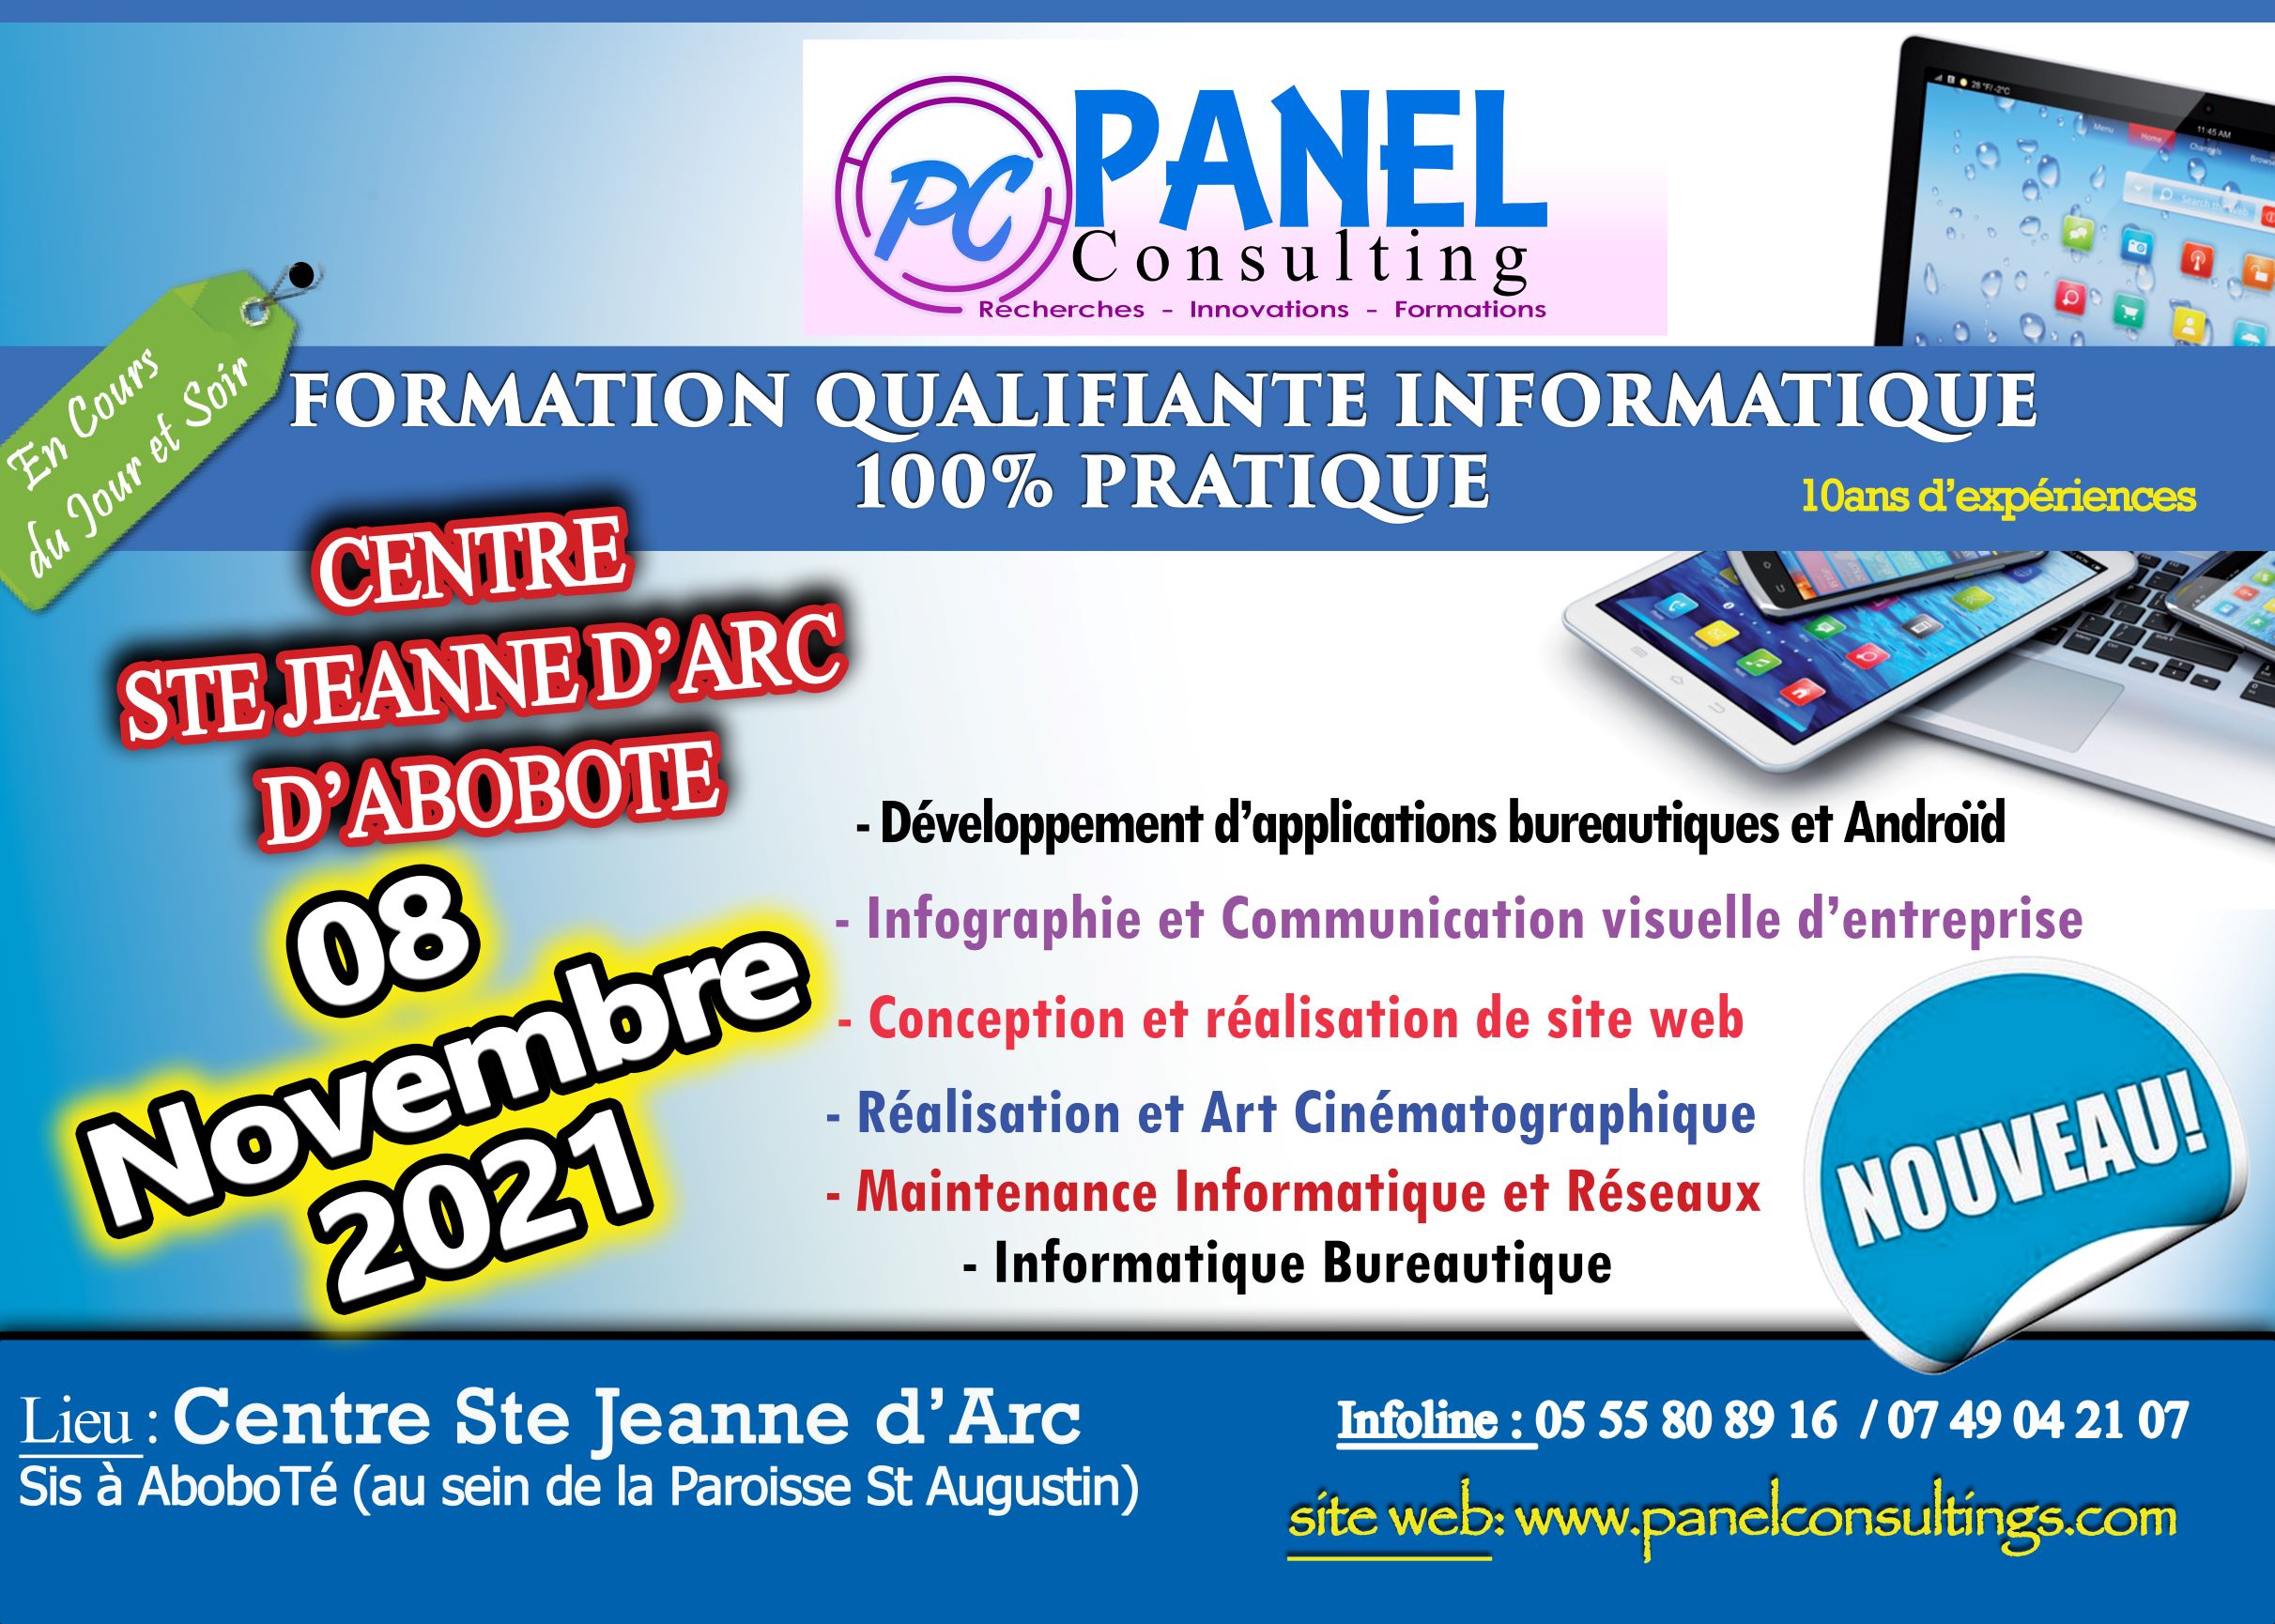 Nov-Affiche formation qualifiante 2021-2022 aboboTe.jpg-panel-consulting